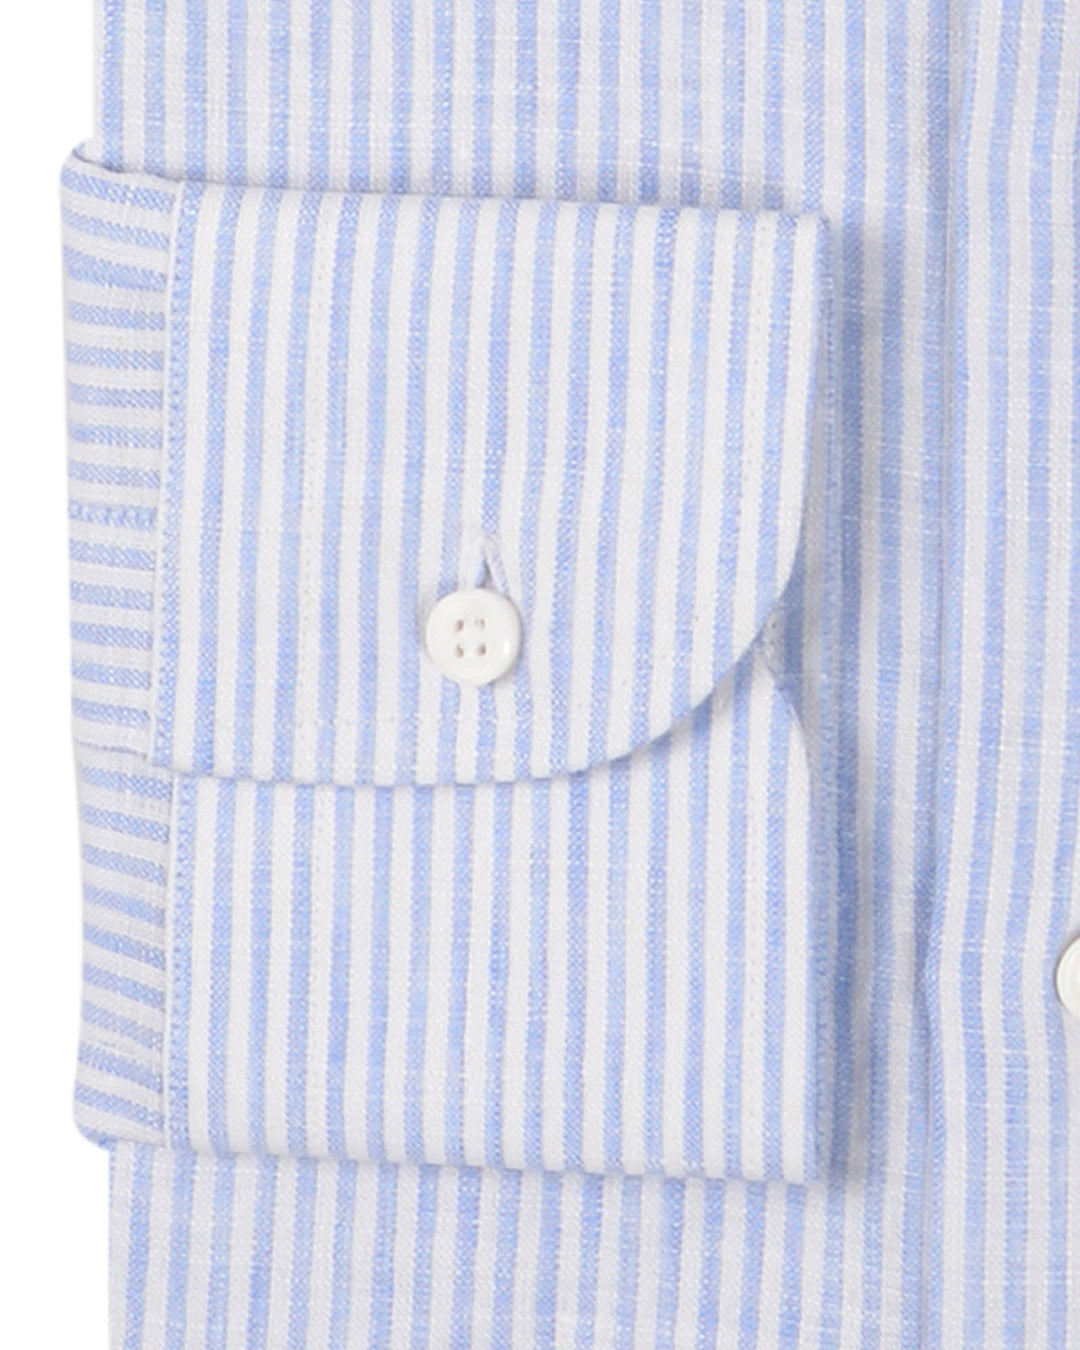 Cuff of the custom linen shirt for men in light blue dress stripes by Luxire Clothing